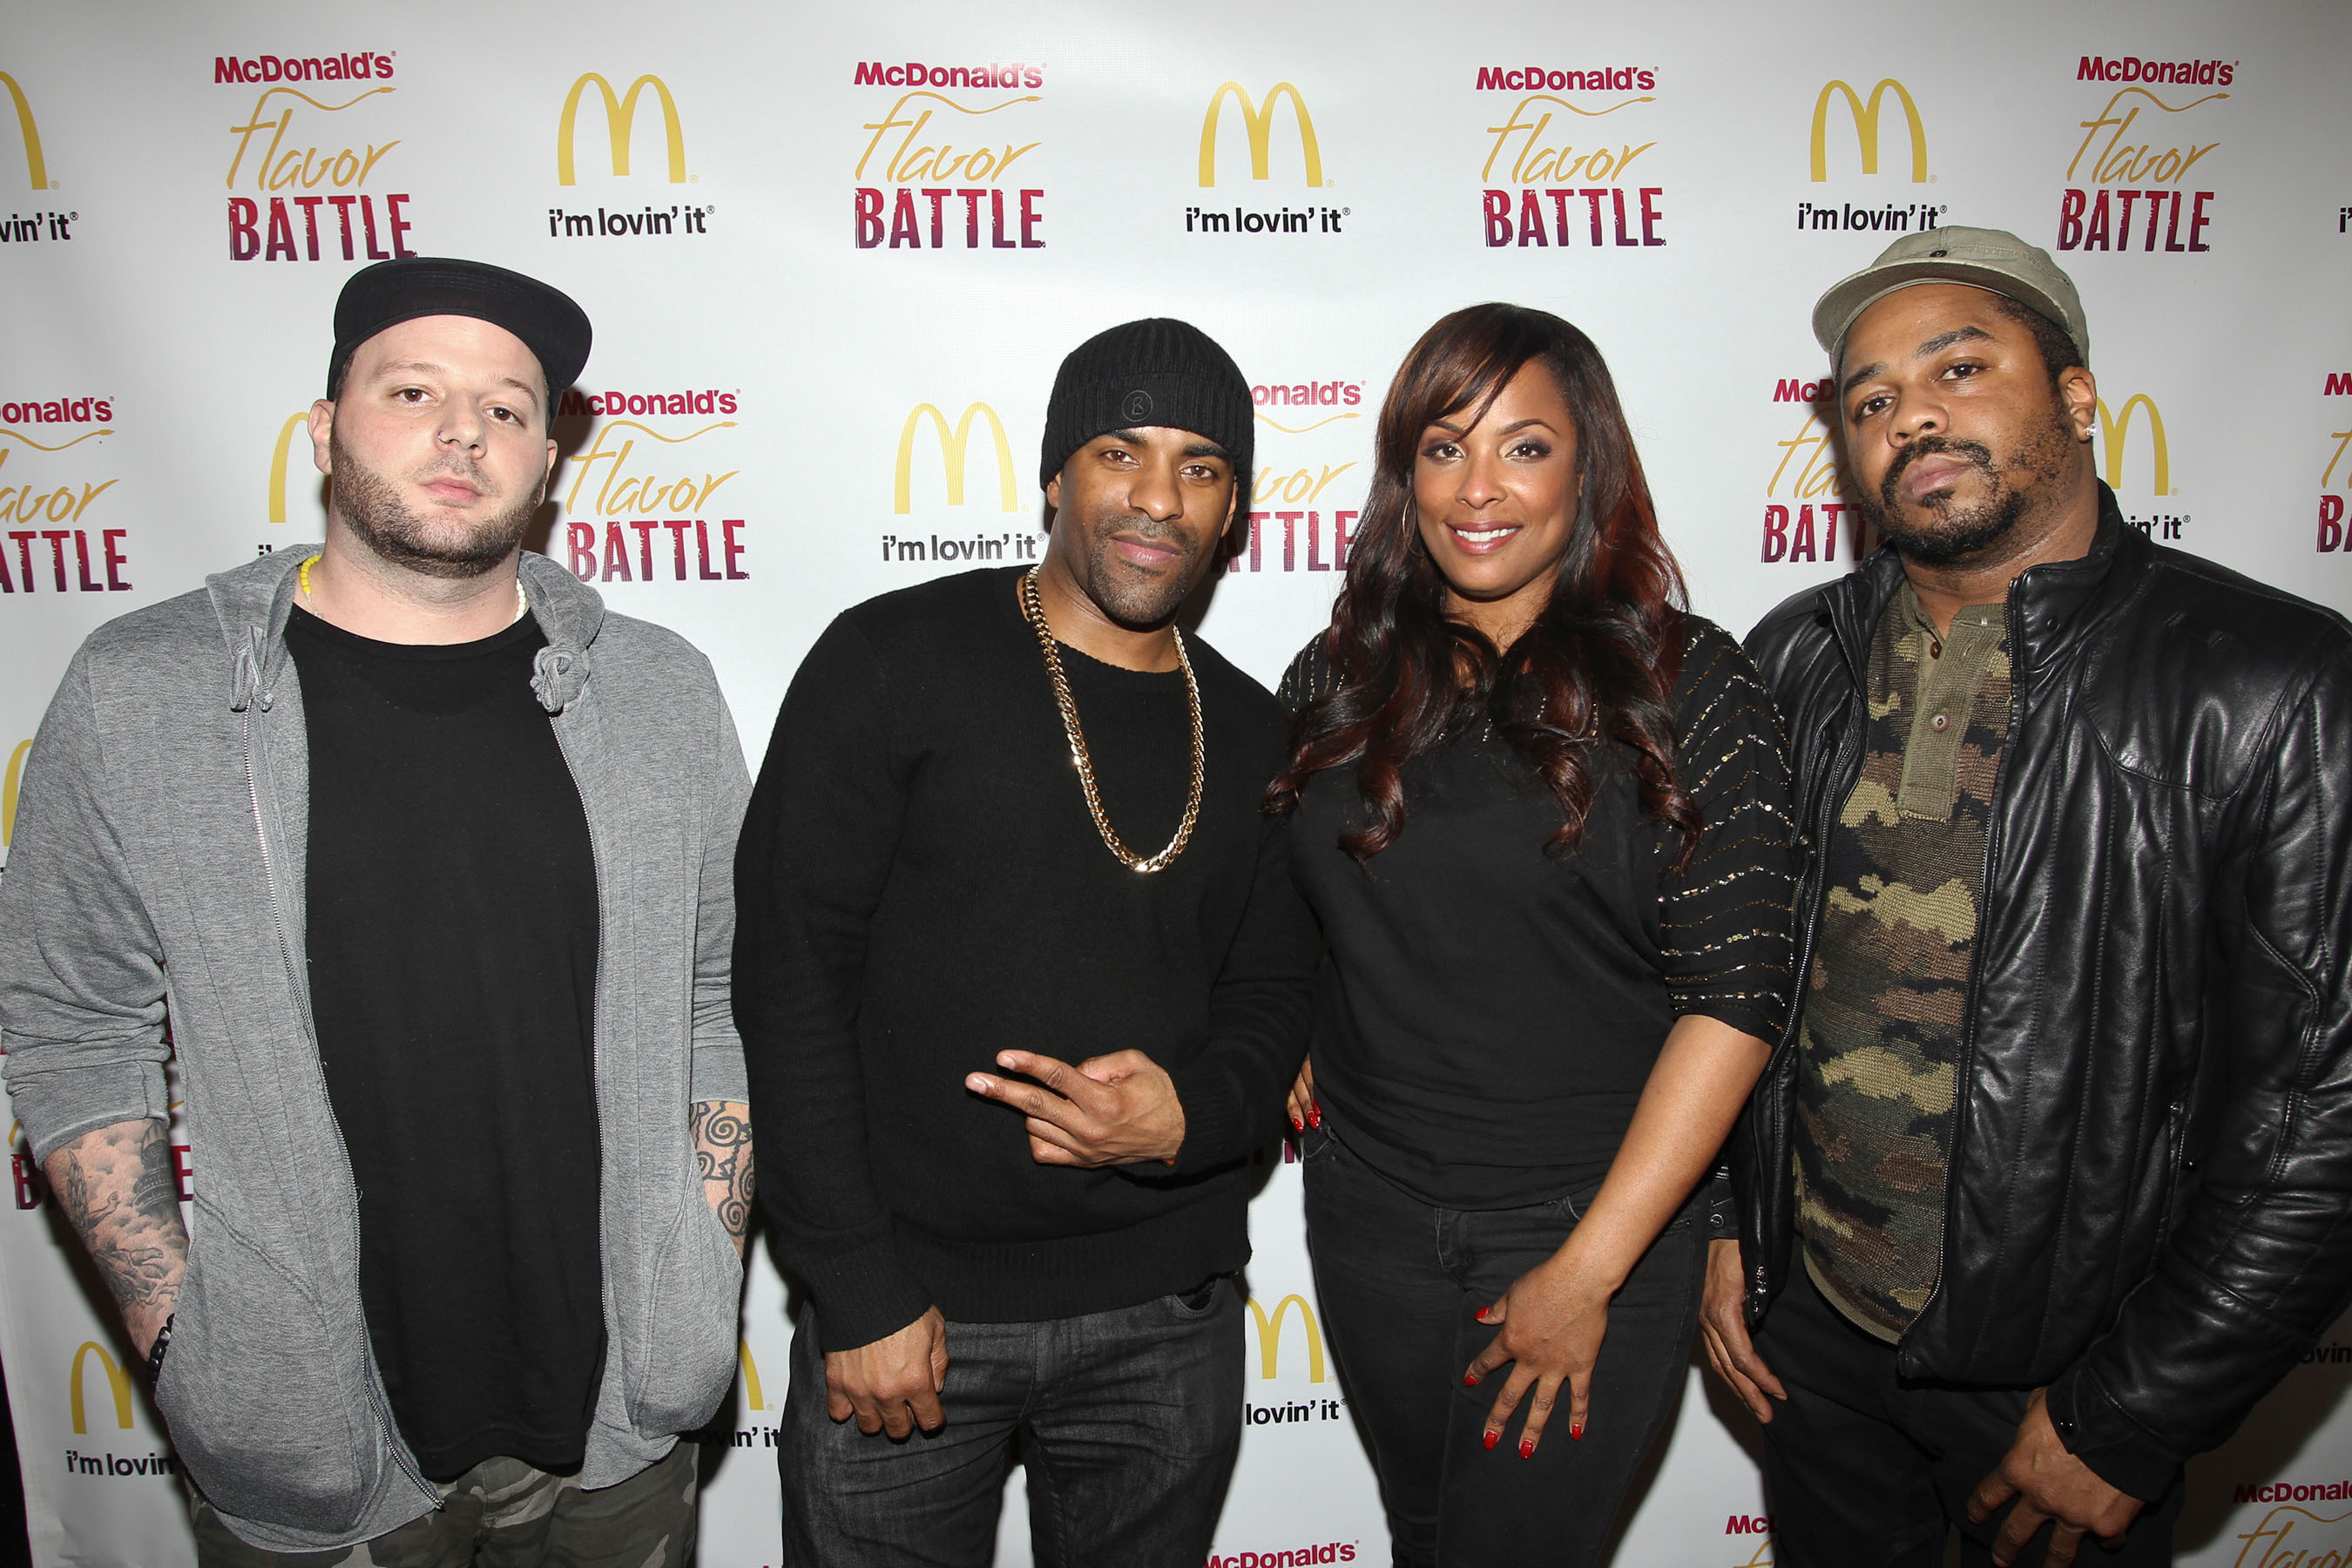 2014 McDonald's Flavor Battle judges (l-r) DeeJay Element, DJ Clue, DJ Spinderella and Just Blaze. The judges were tasked with critiquing, scoring and ultimately deciding the champion among finalists DJ Niena Drake of Chicago, DJ R-Tistic of Los Angeles and DJ Erika B of Newport News, VA. Once scores were tallied, DJ R-Tistic was named the 2014 champion. McDonald's Flavor Battle is a national online DJ competition that showcases some of America's hottest up-and-coming mix-masters. Watch the rebroadcast of the finale any time until March 30 on FlavorBattle.com. Photo credit: Soul Brother.(PRNewsFoto/McDonald's) (PRNewsFoto/MCDONALD'S)